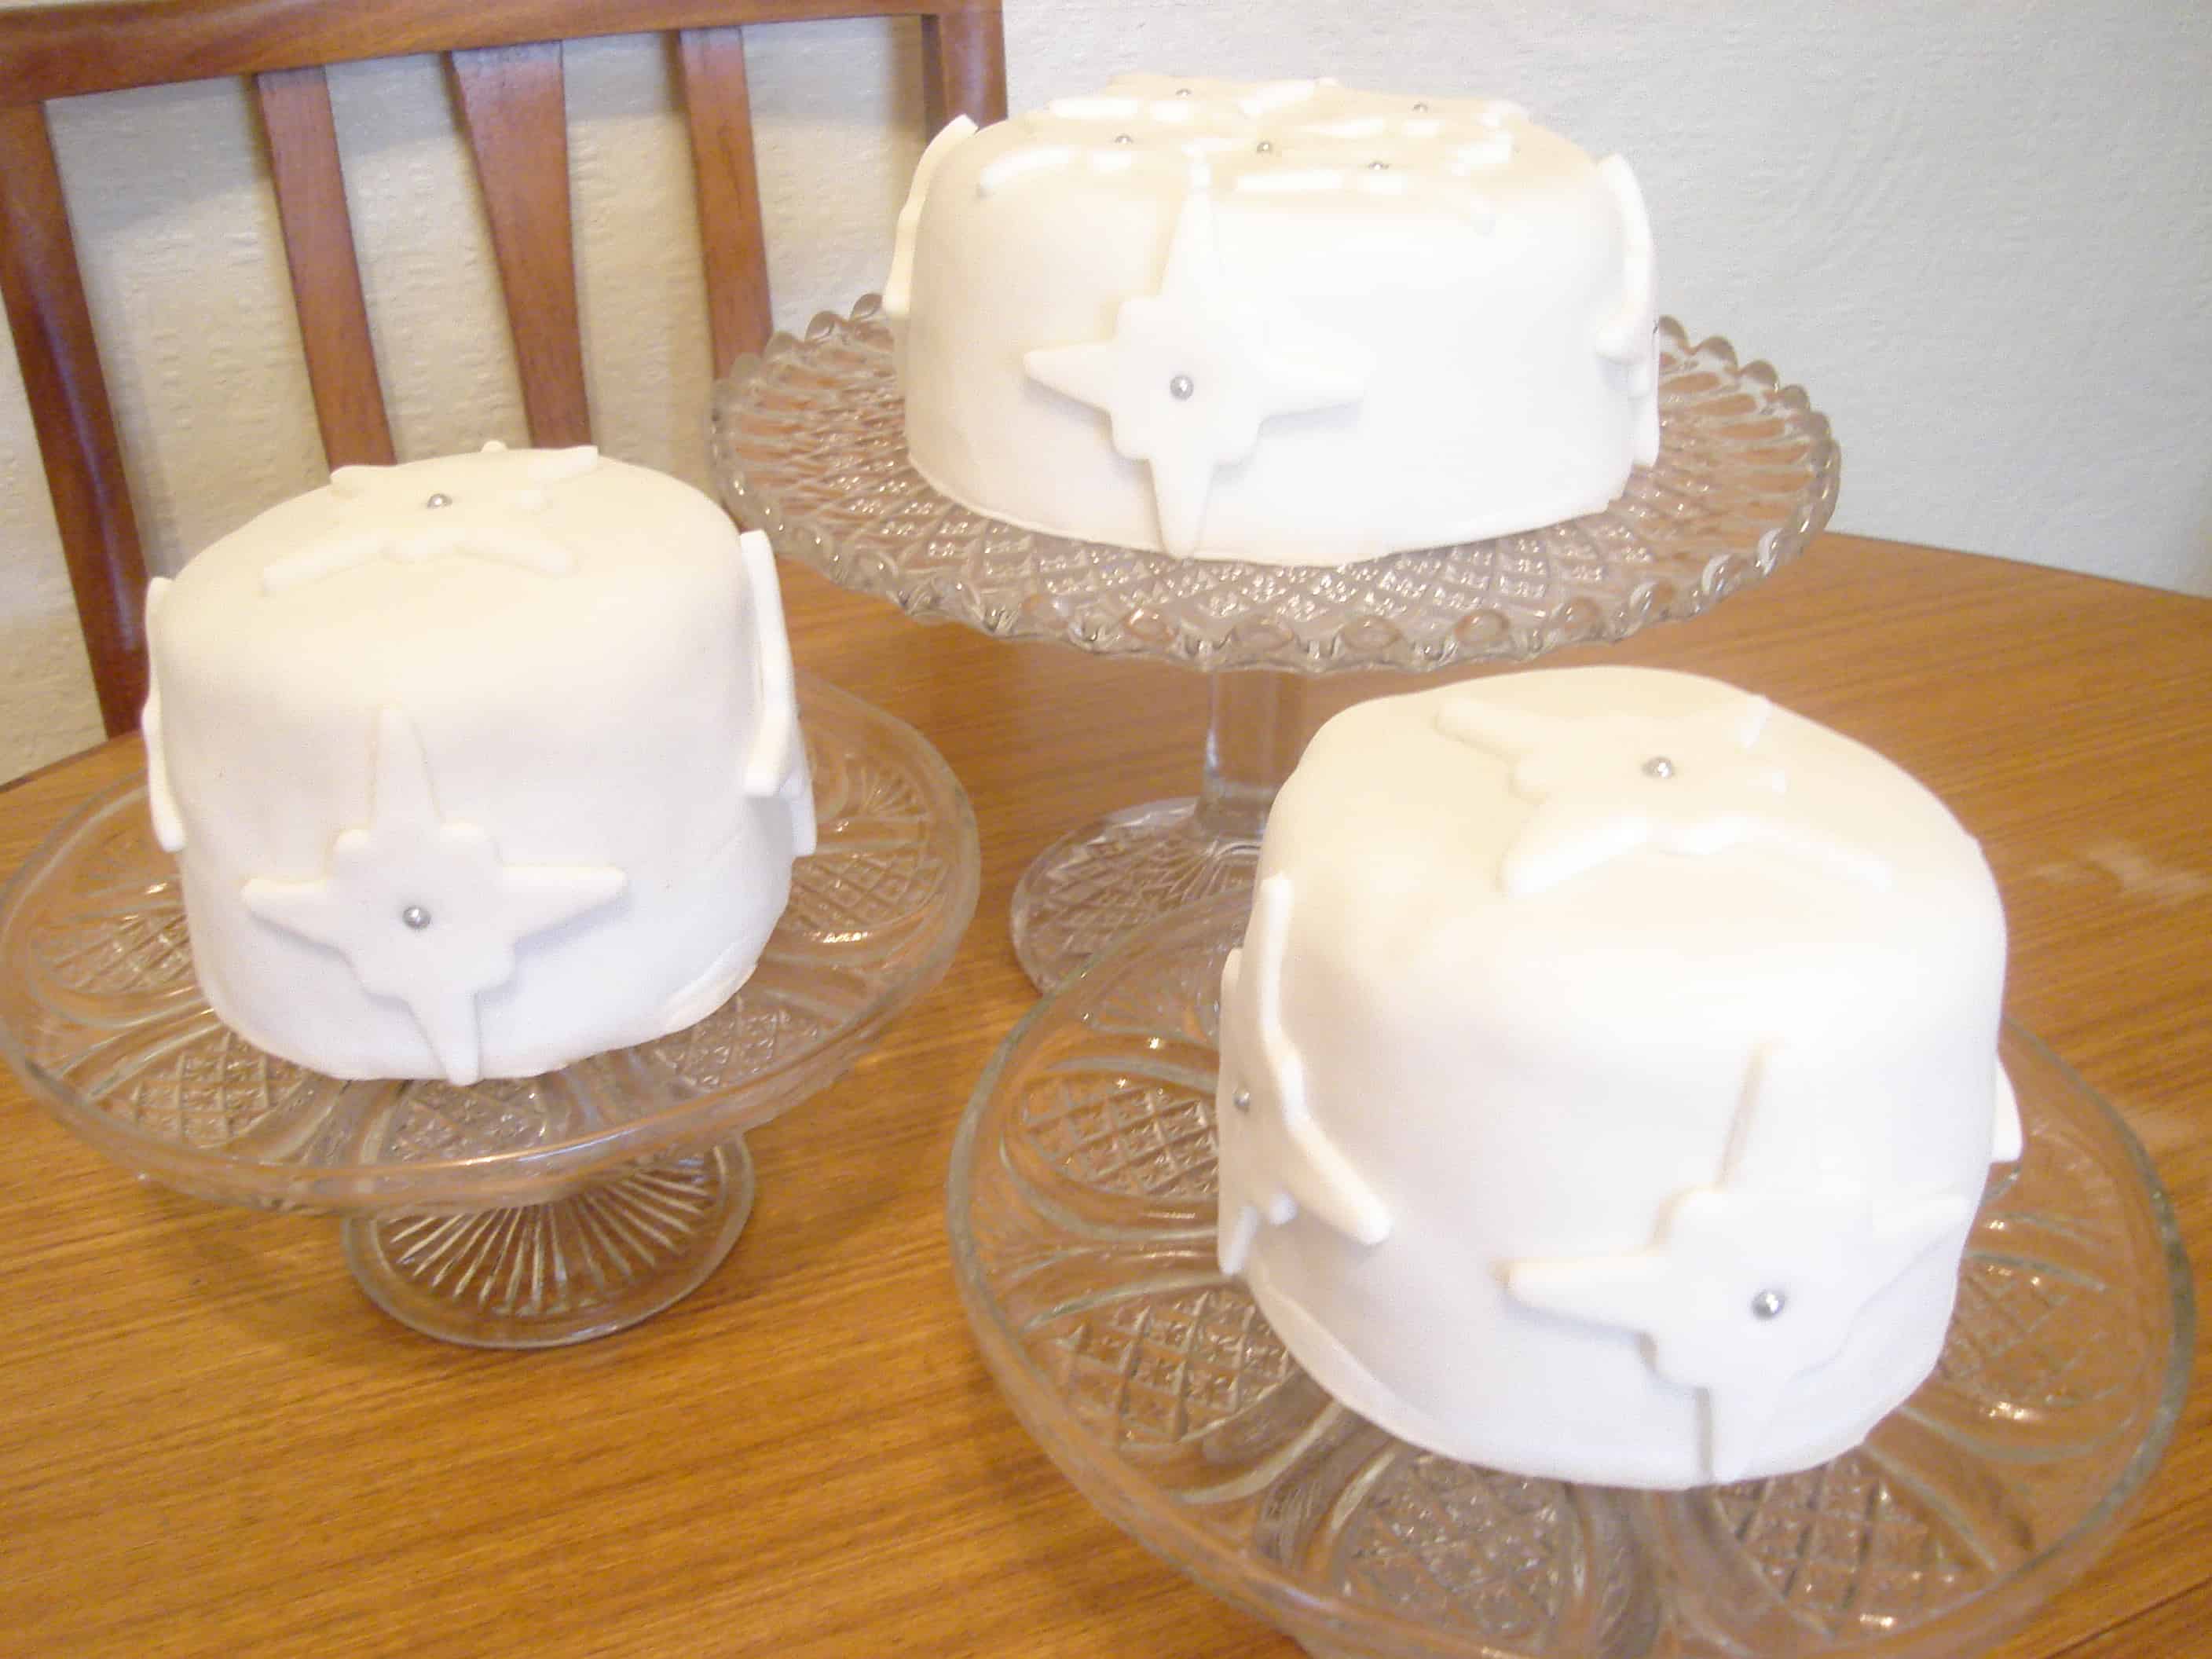 Decorated christmas cakes with white fondant icing